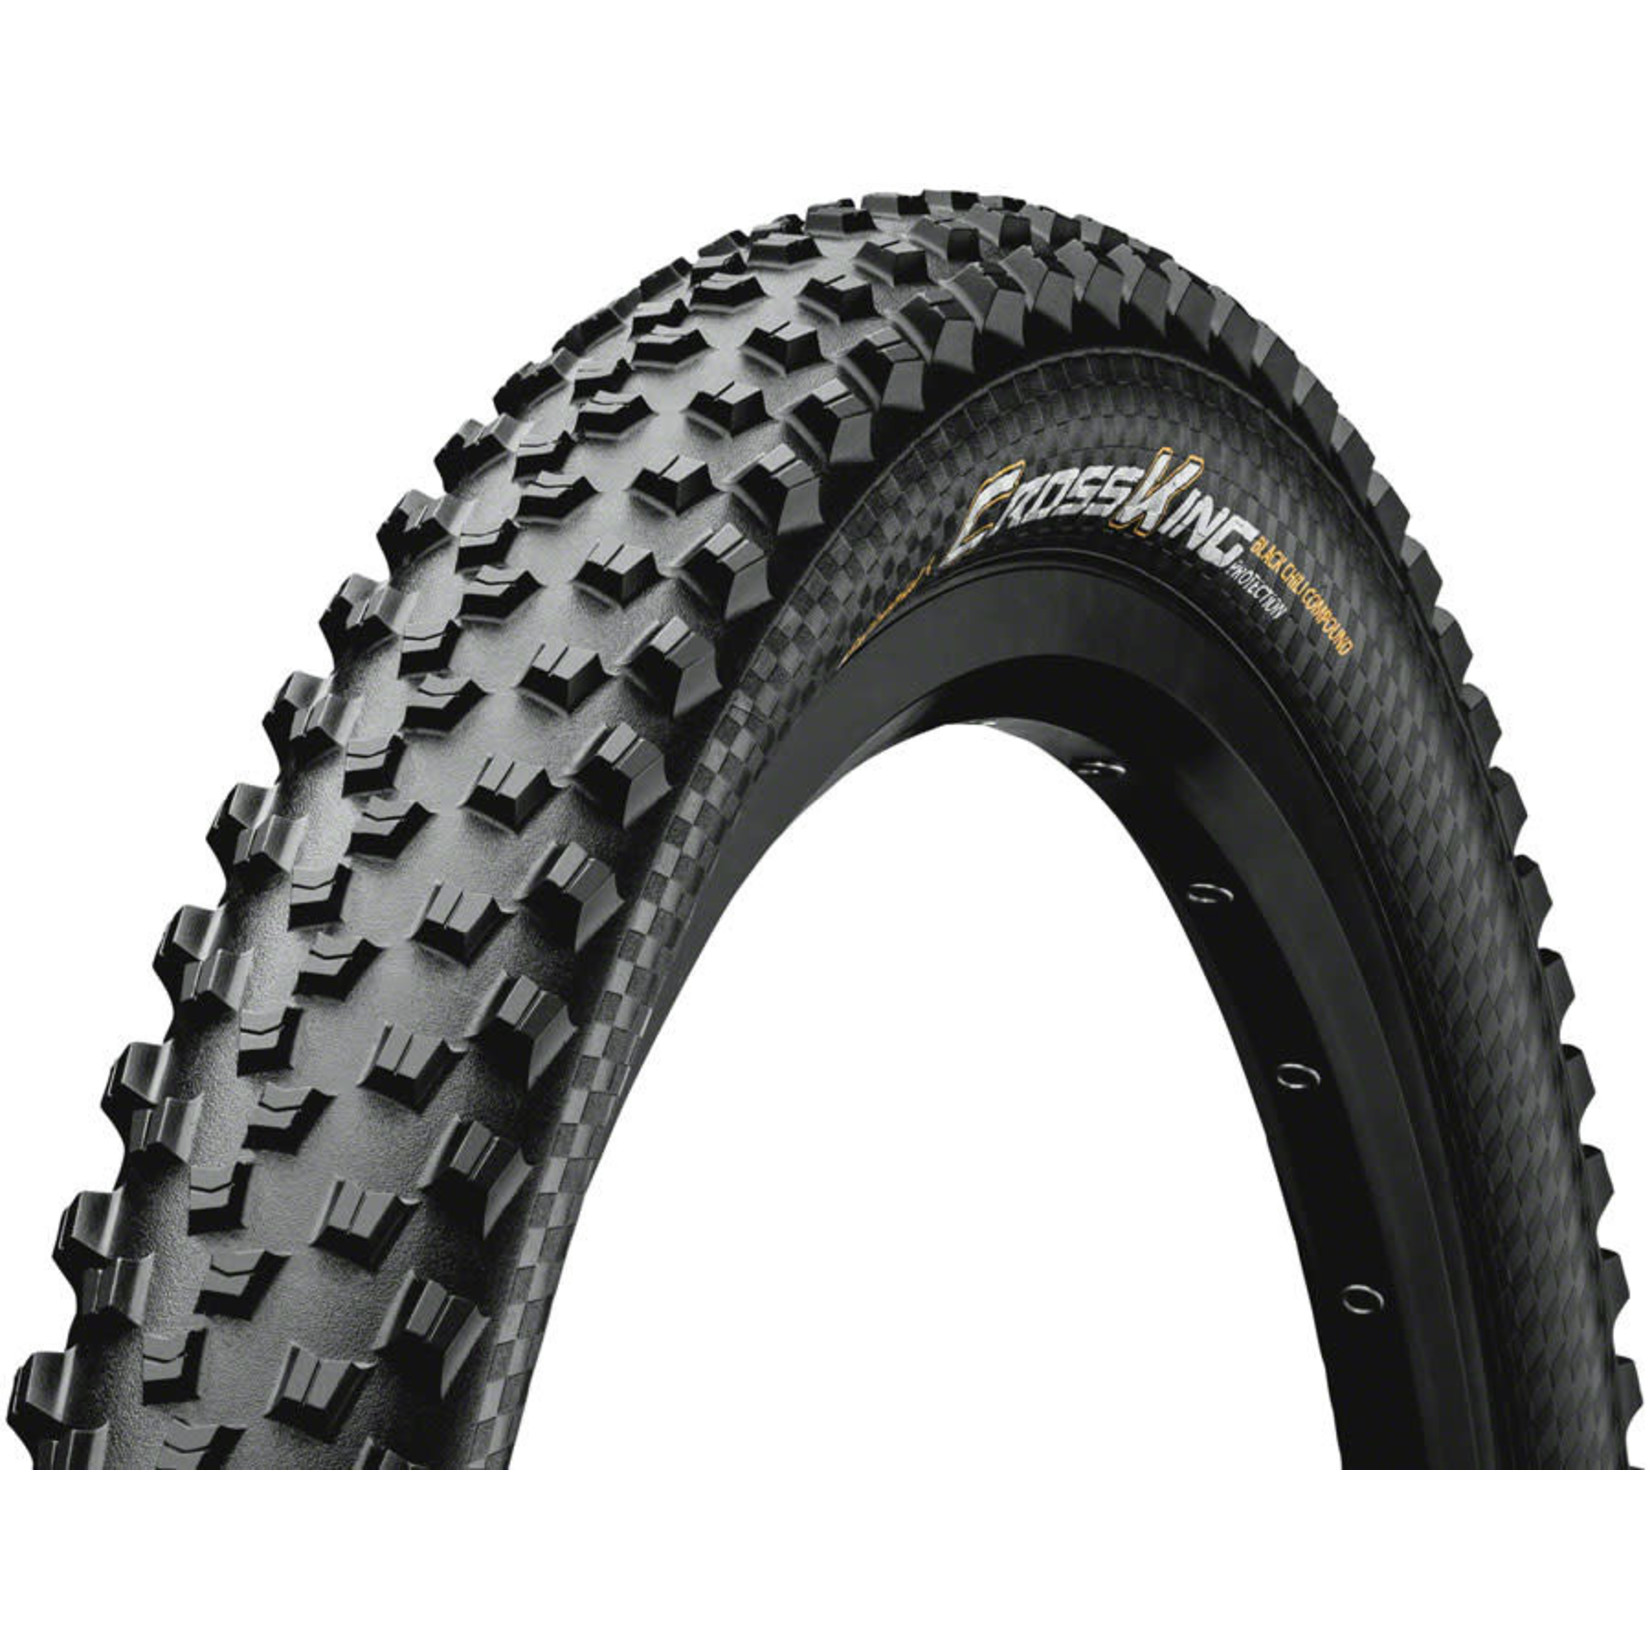 Continental Continental Cross King 29 x 2.3 Fold ProTection+ Tire: Black Chili